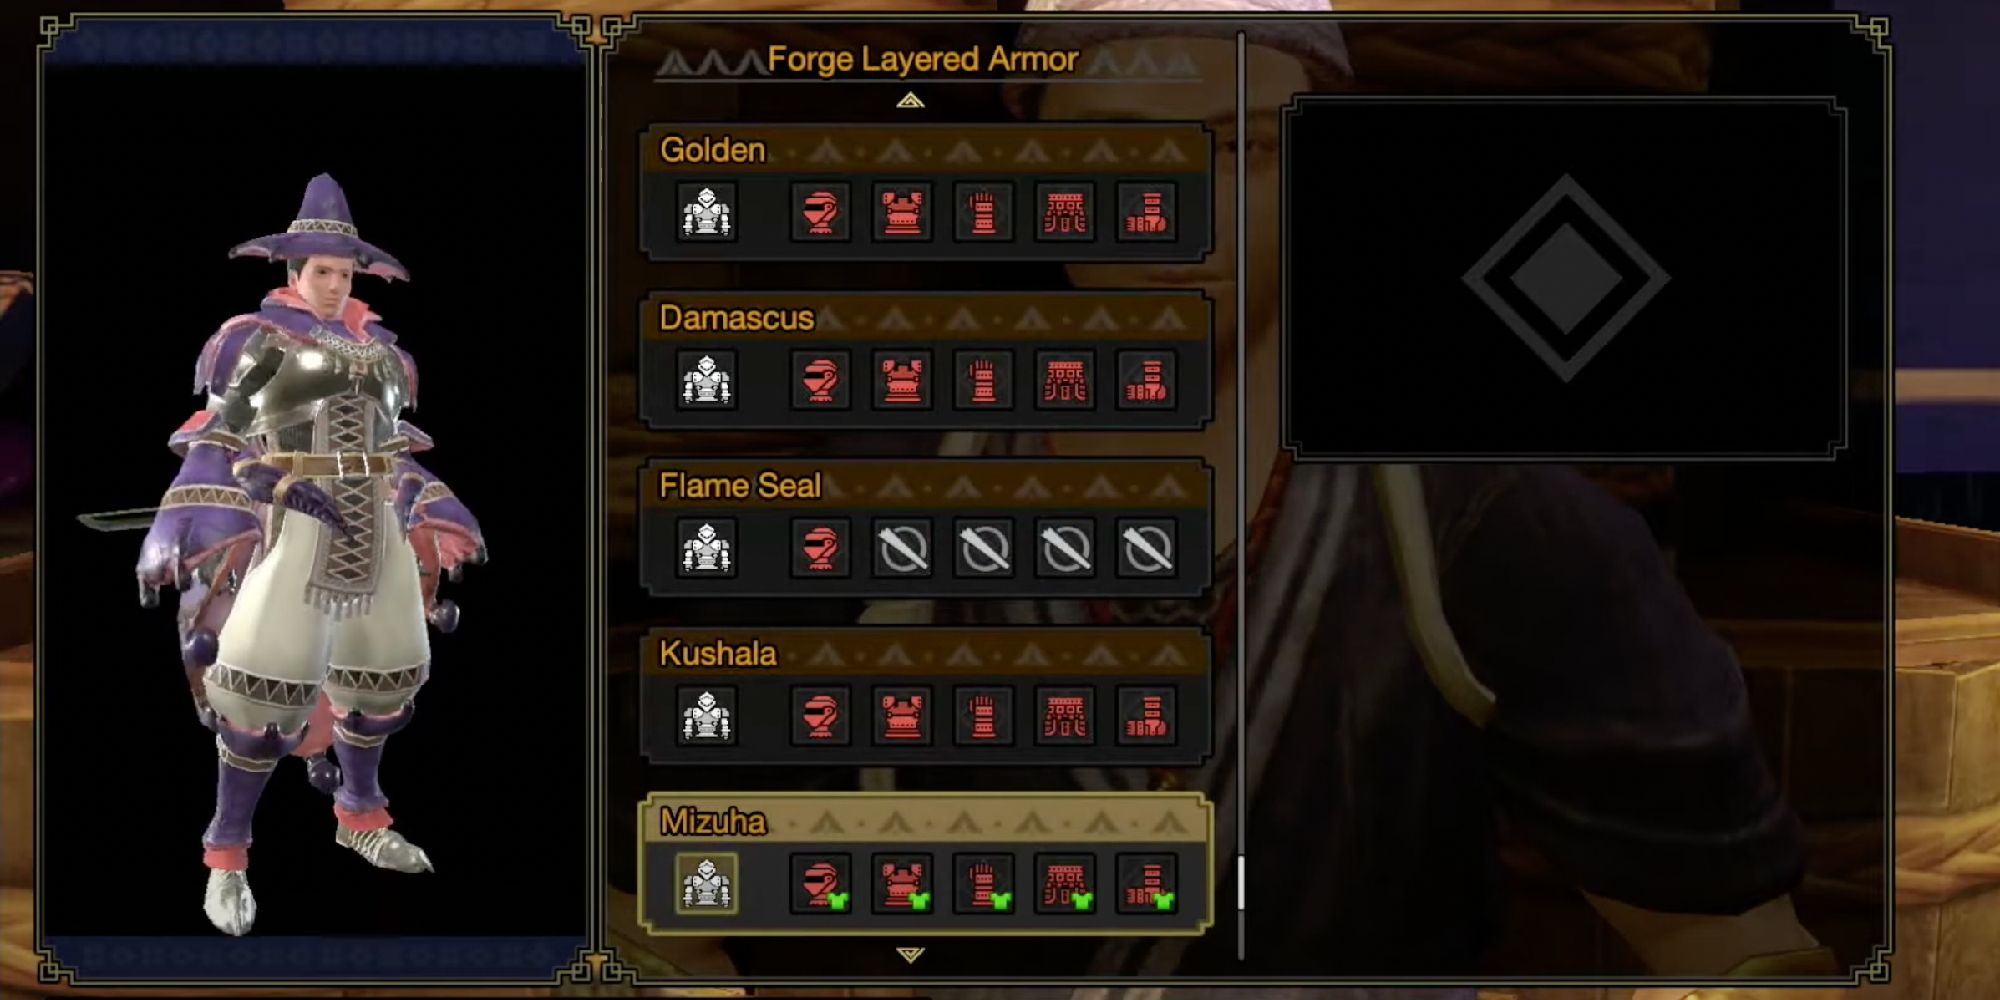 The armor select screen showing a male hunter in Mizuha layered armor